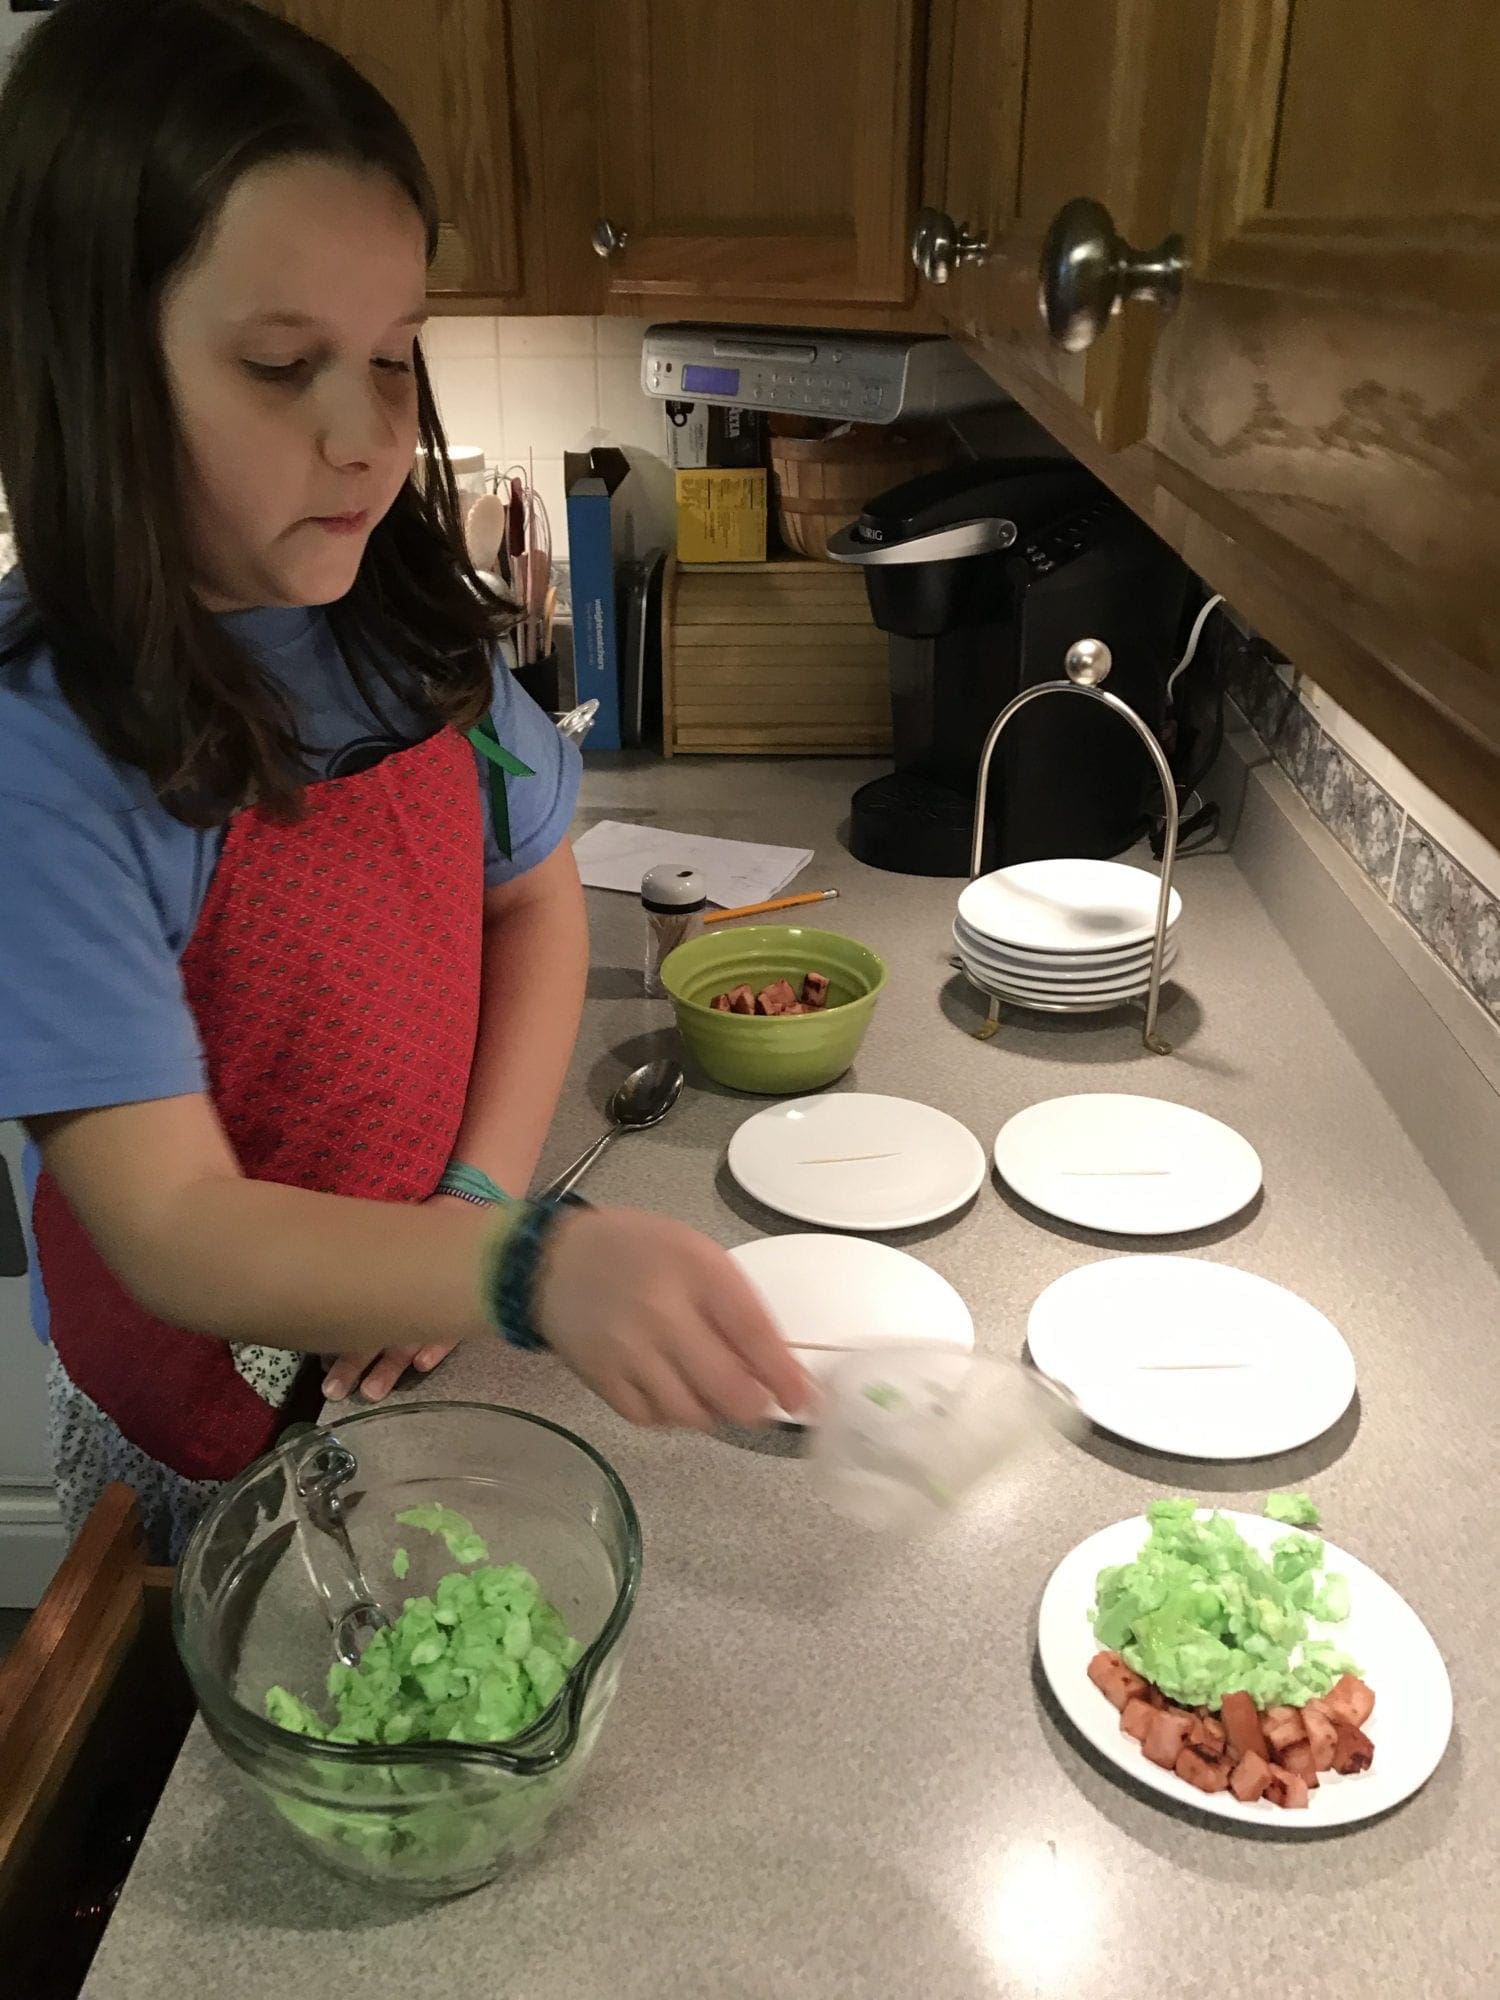 dishing up green eggs and ham